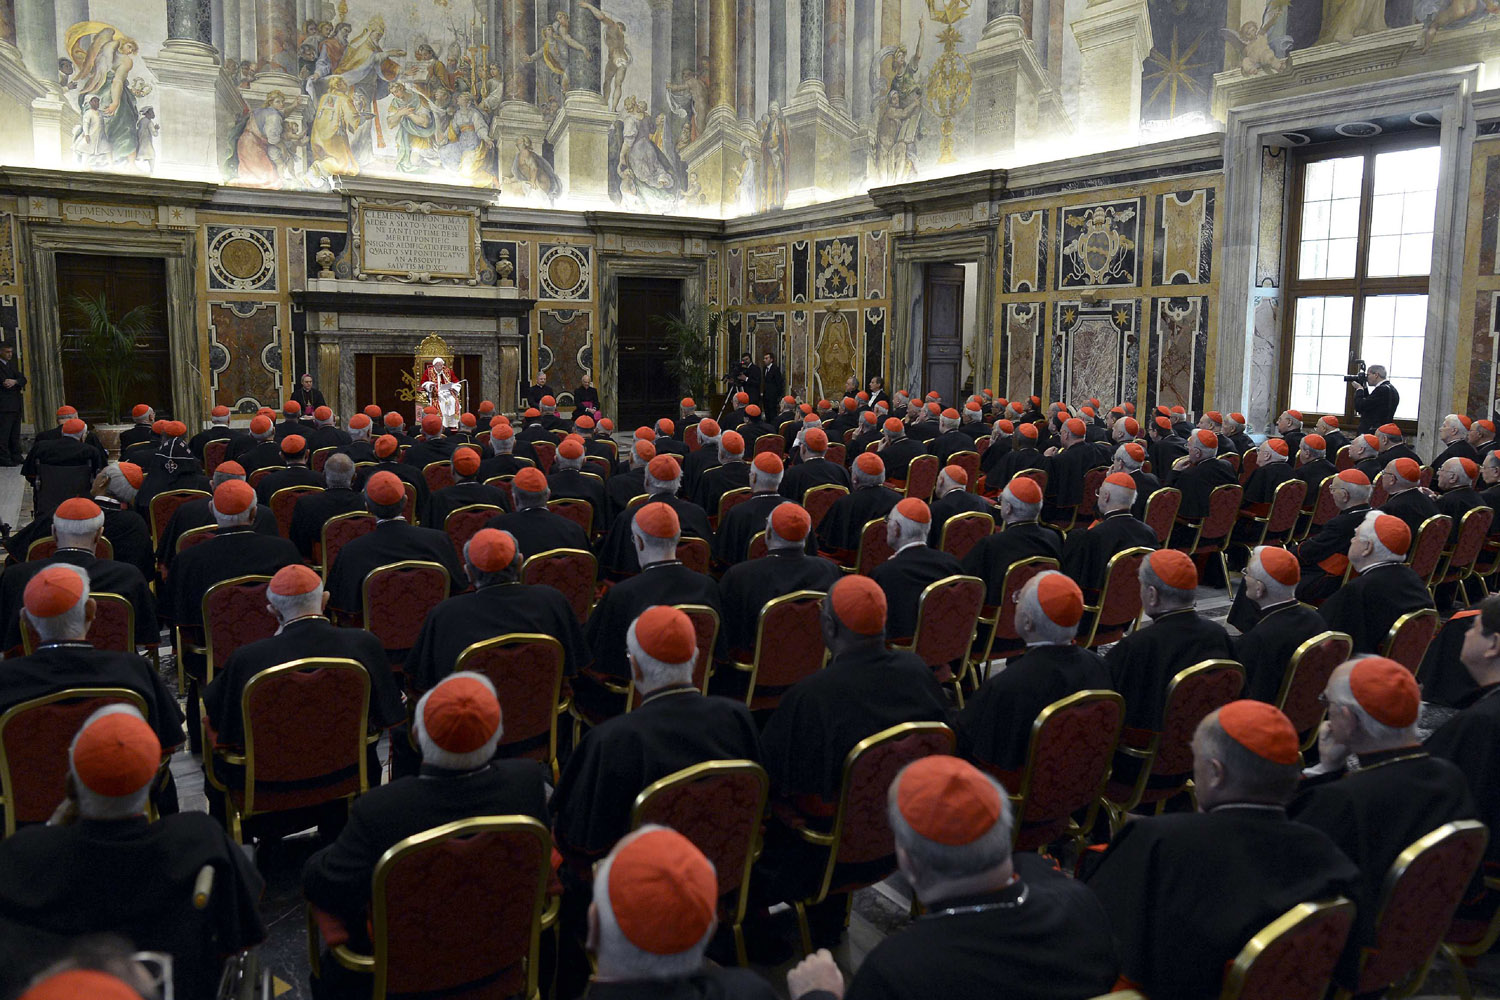 Feb. 28, 2013. Pope Benedict XVI gives an address during the last meeting with the Cardinals at the Vatican.